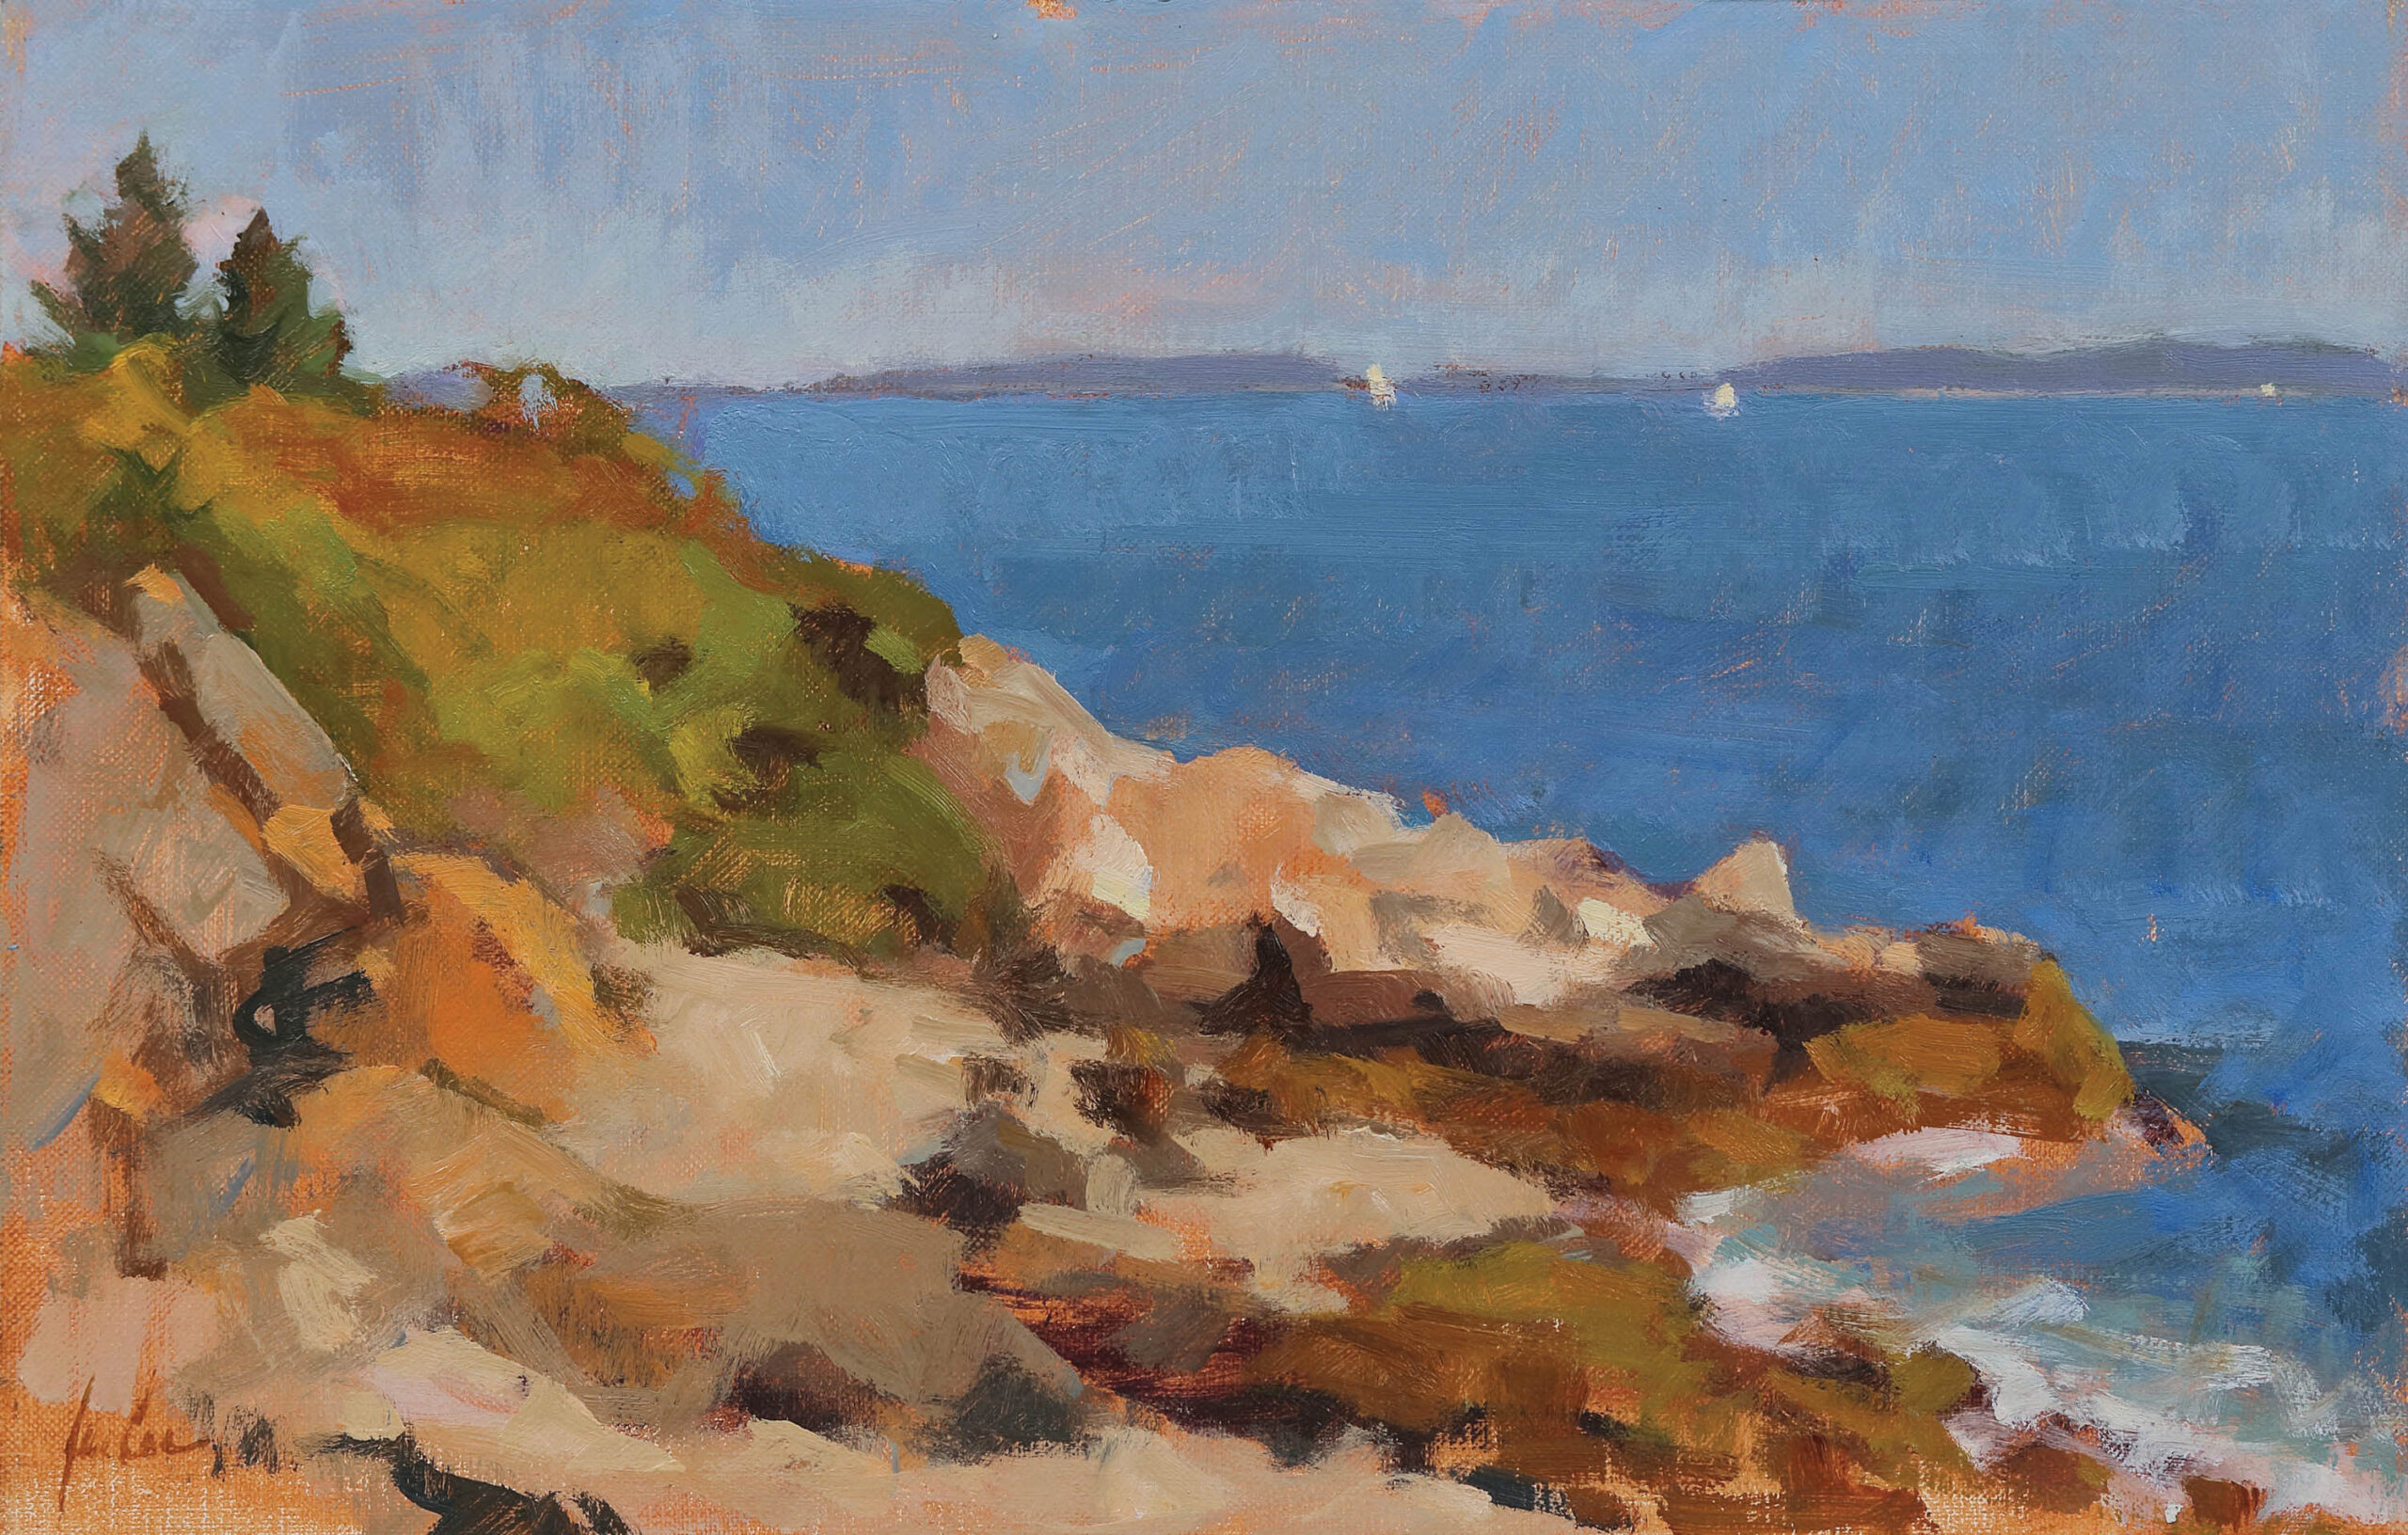 Painting on location - James Coe, "Indian Island Shore Study," 2022, oil, 9 x 14 in. Collection the artist Plein air